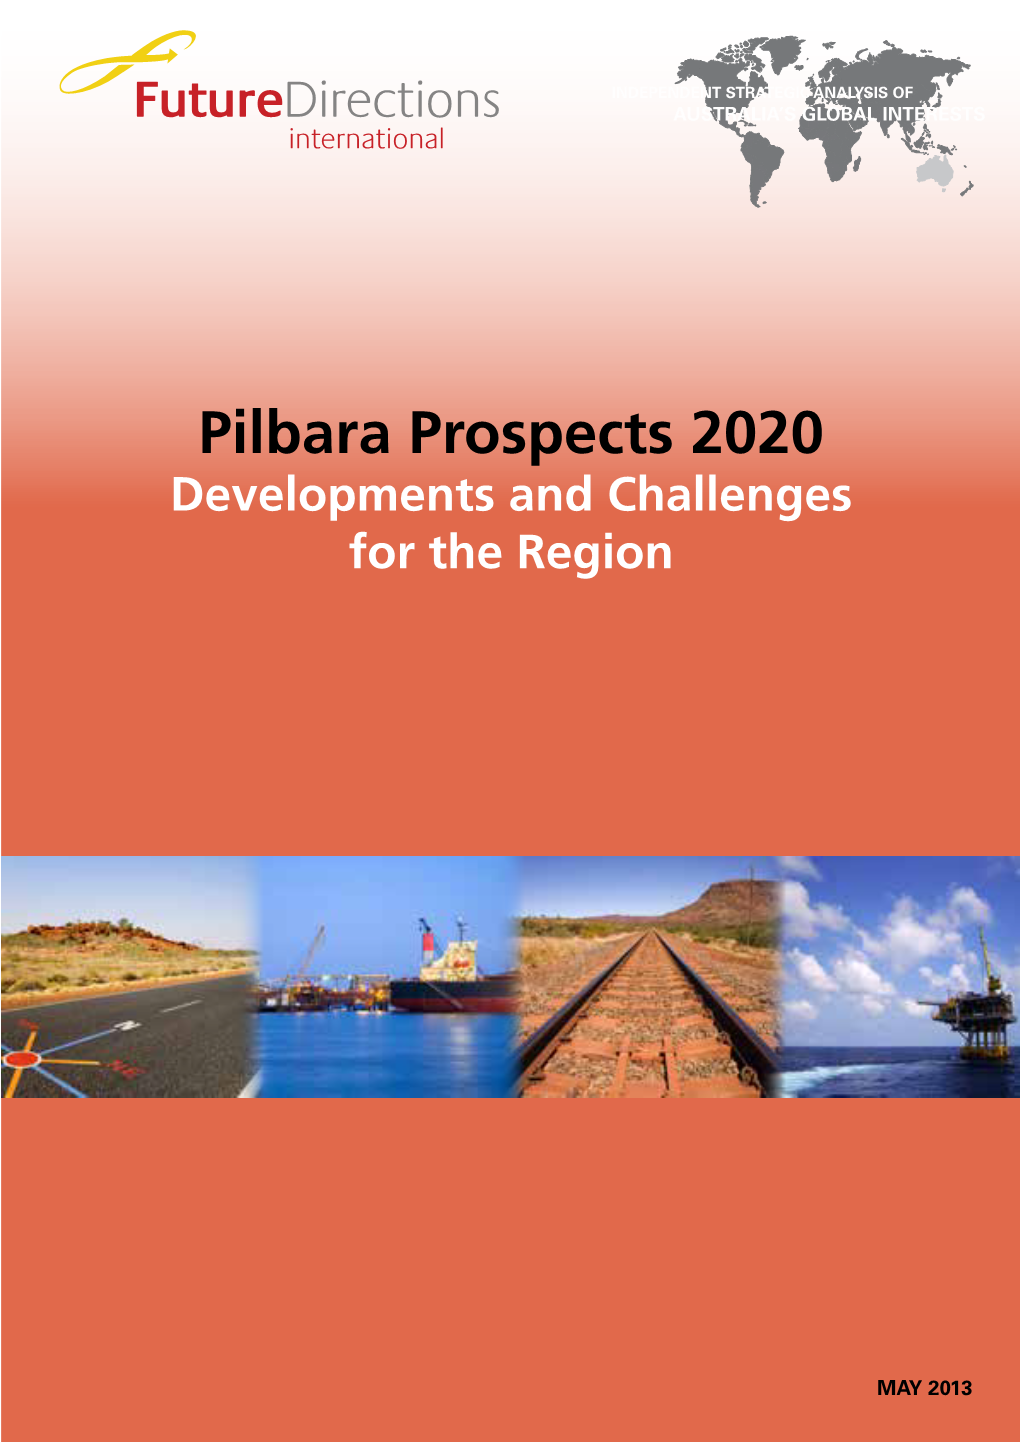 Pilbara Prospects 2020 Developments and Challenges for the Region